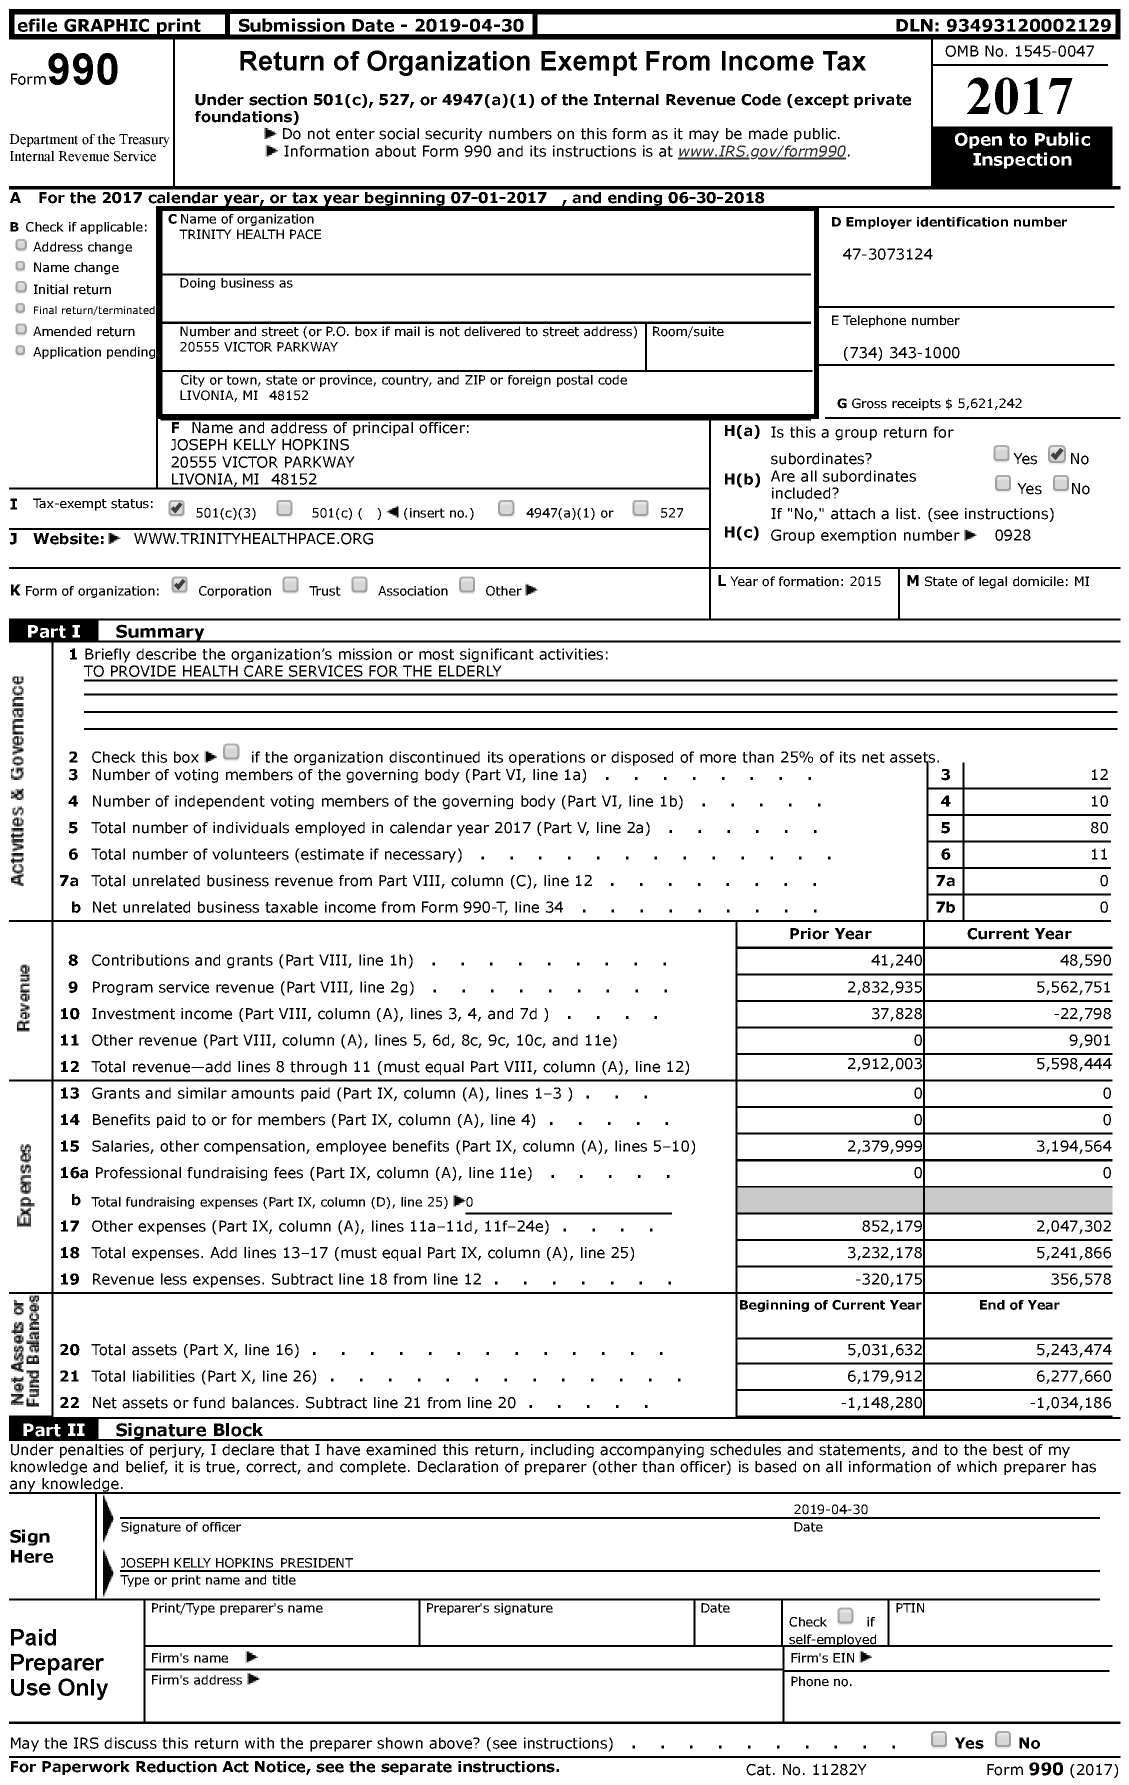 Image of first page of 2017 Form 990 for Trinity Health Pace